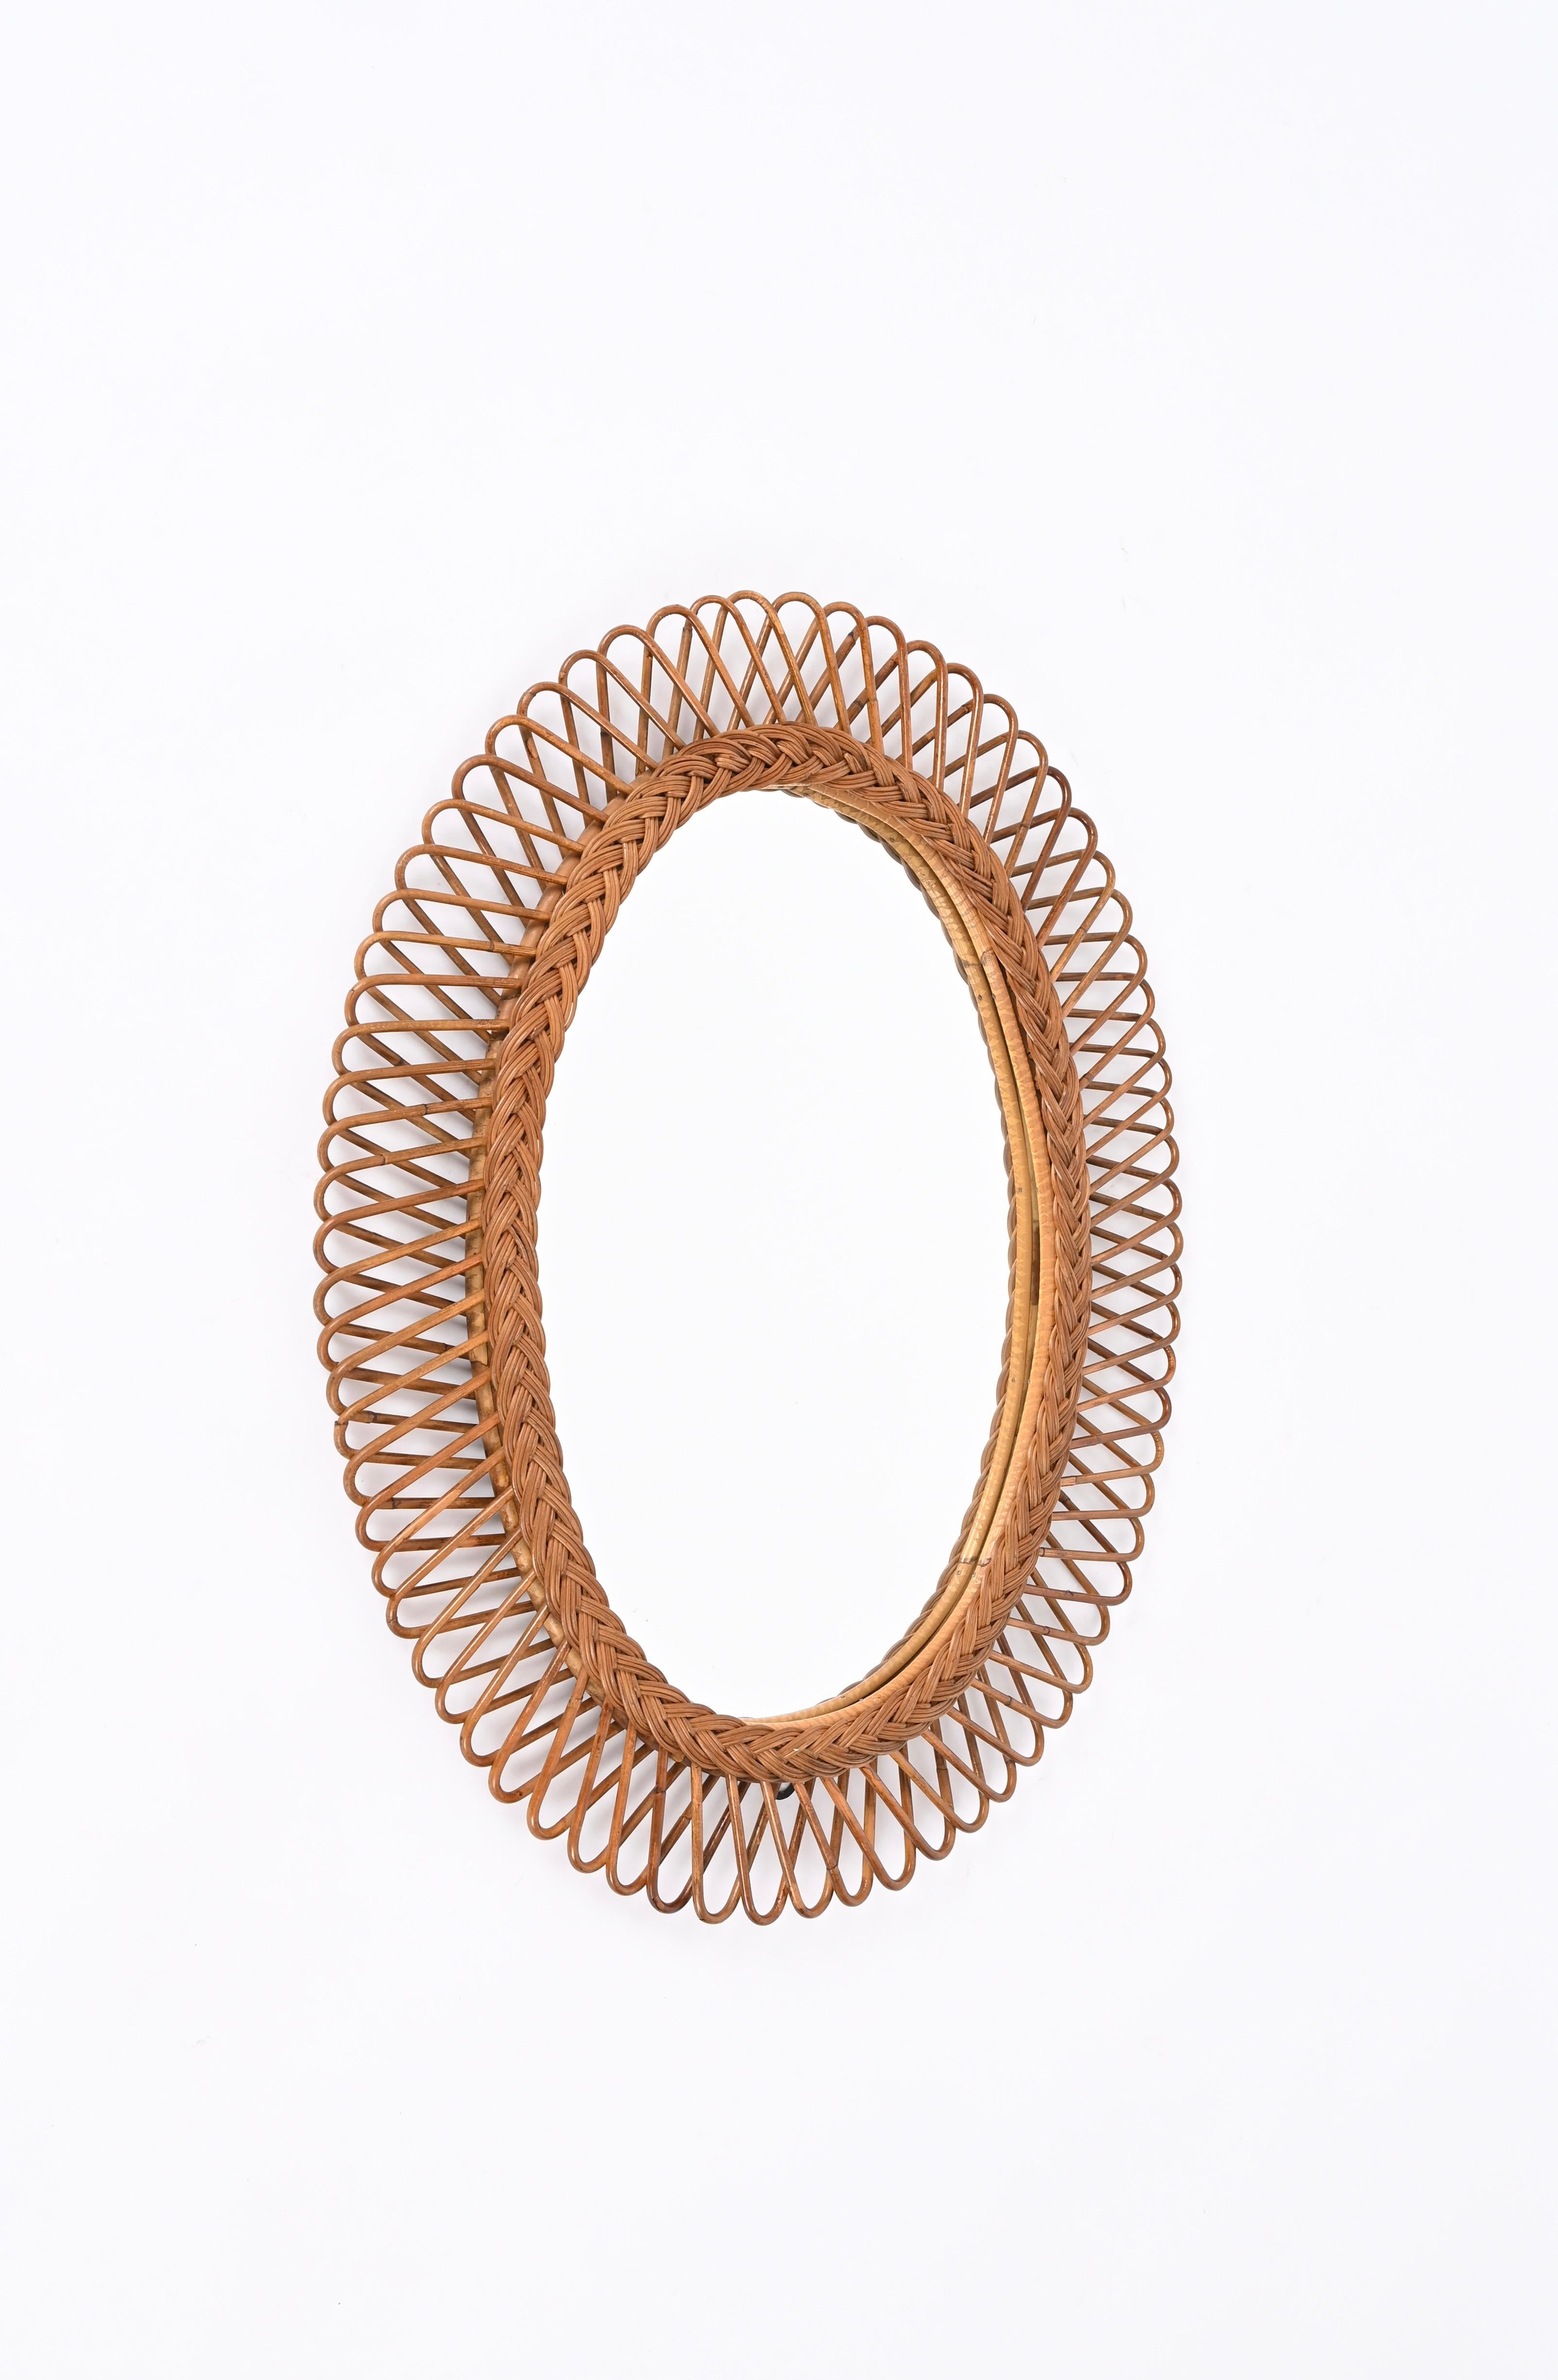 Franco Albini Midcentury  Bamboo, Rattan and Wicker Oval Mirror,  Italy 1970s For Sale 8